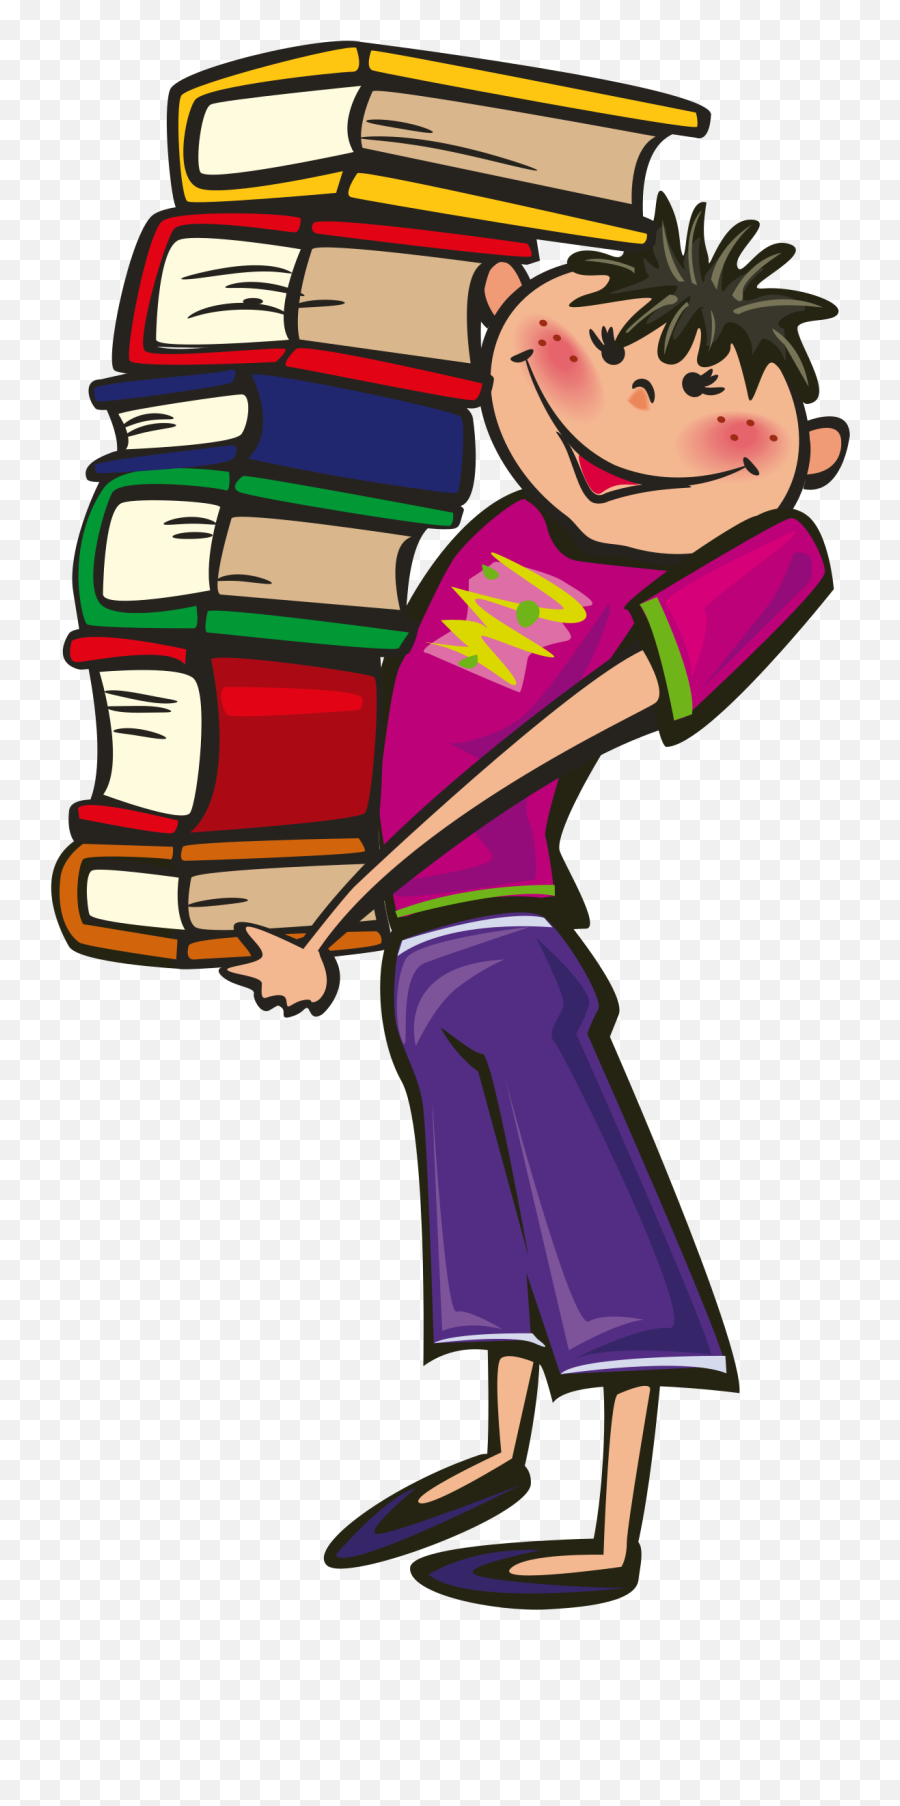 Stack Of Books Image Of Stack Books - Student With Book Clip Art Emoji,Books Clipart